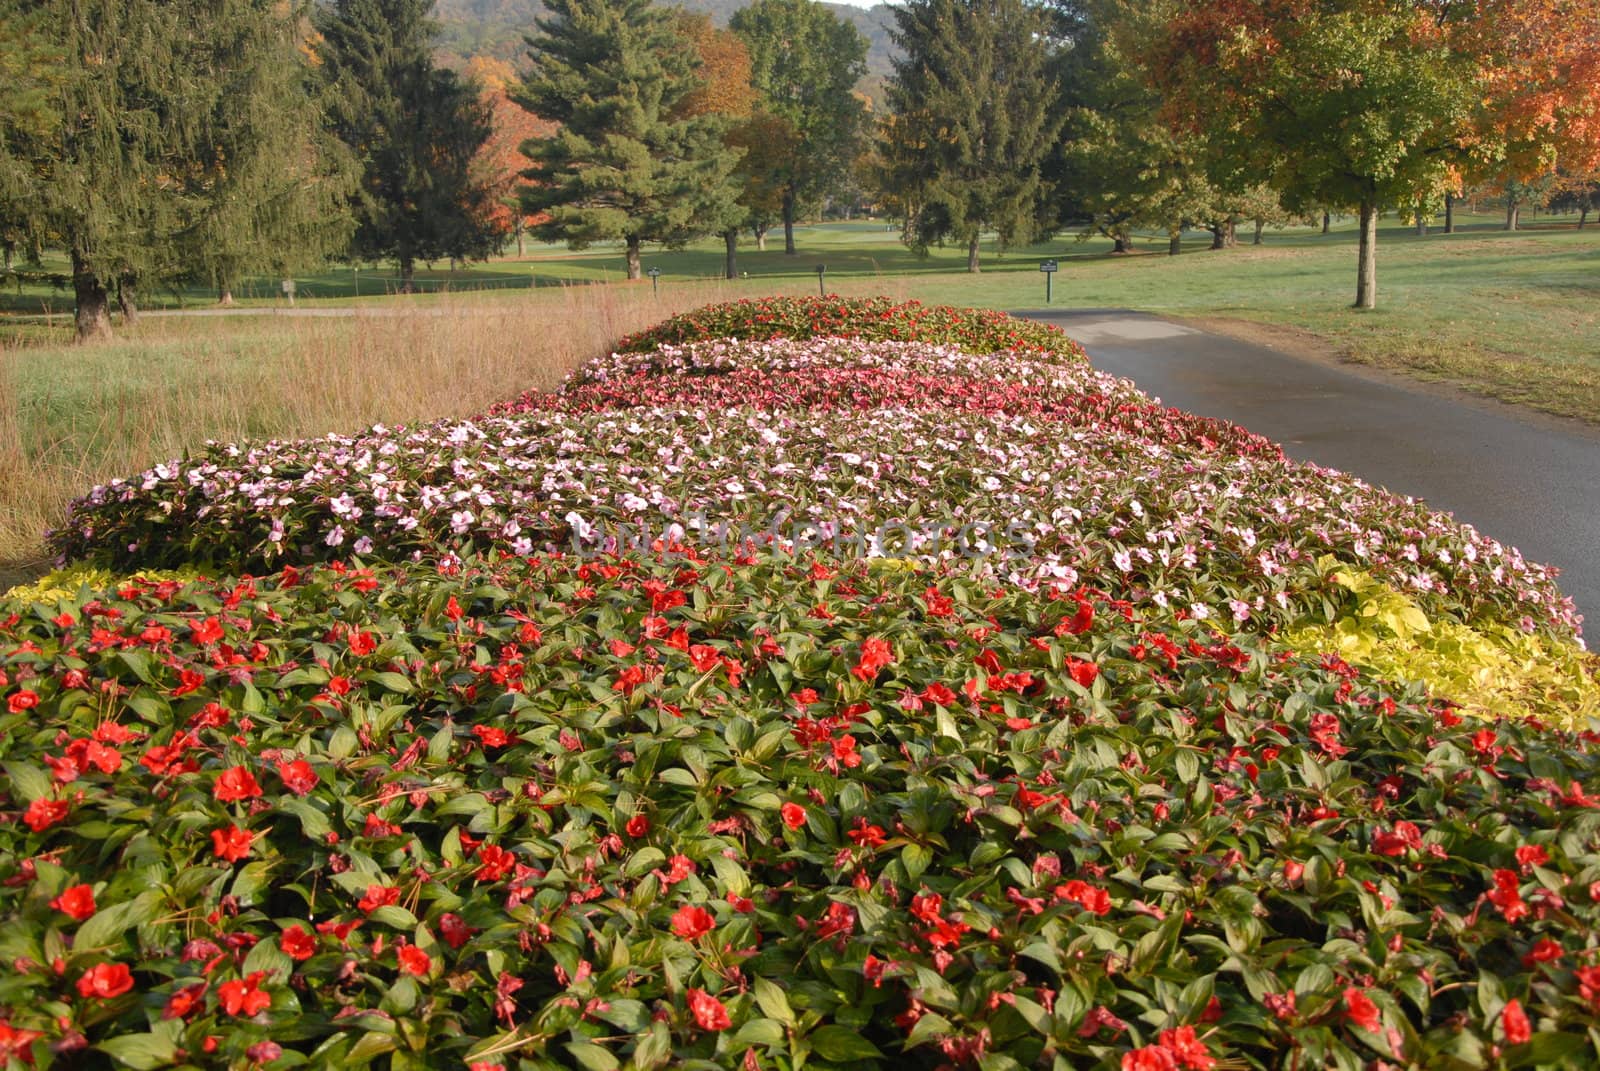 A variety of fall flowers in full bloom.